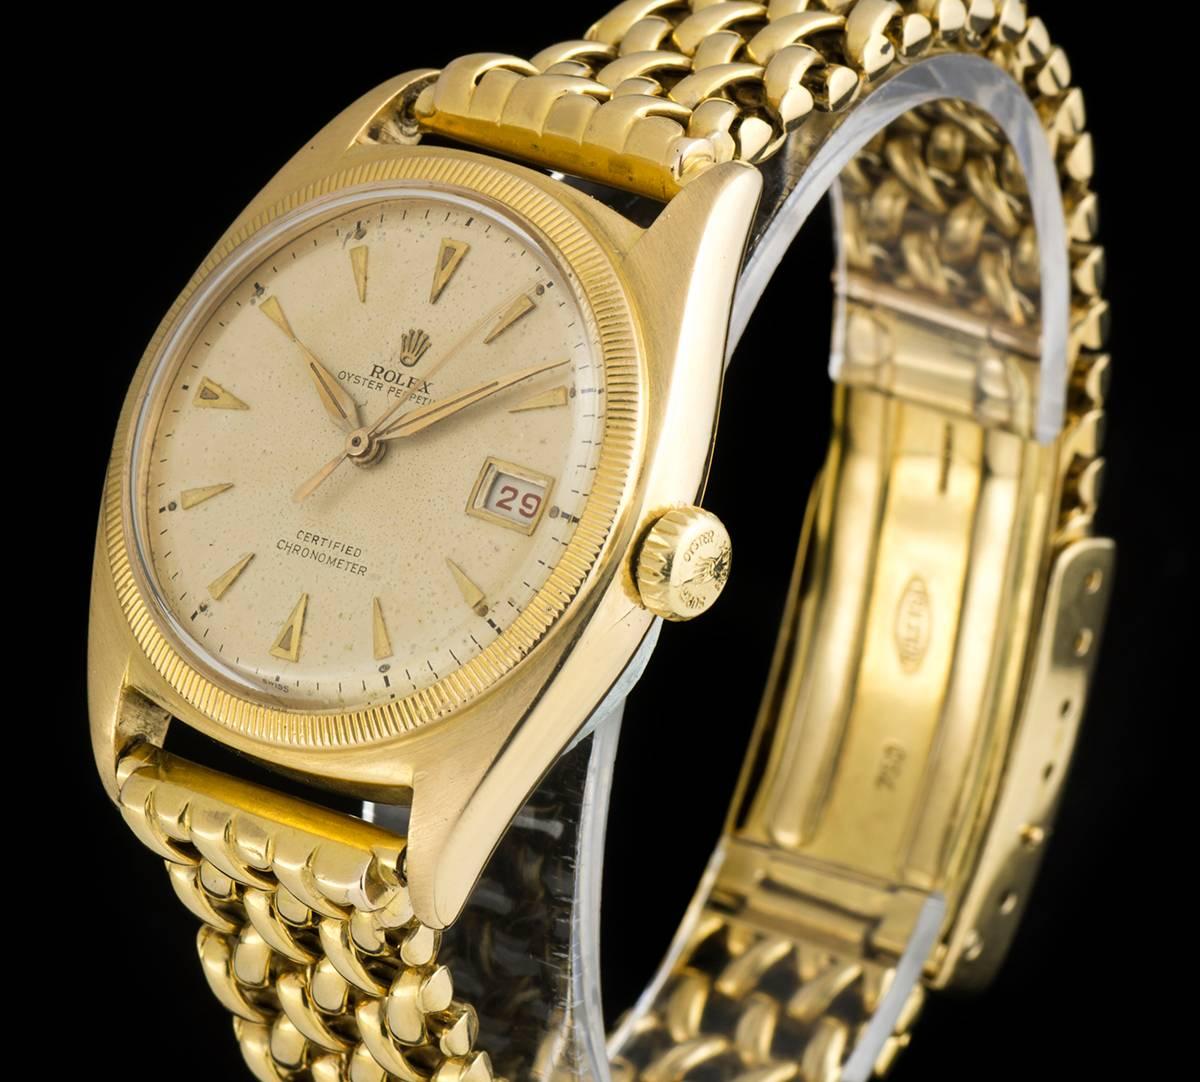 A Rare 18k Yellow Gold Semi Bubble Back Oyster Perpetual Vintage Gents Wristwatch, silvered dial with applied hour markers, a fixed 18k yellow gold coin edge bezel, a very rare original 18k yellow gold bracelet with an original 18k yellow gold